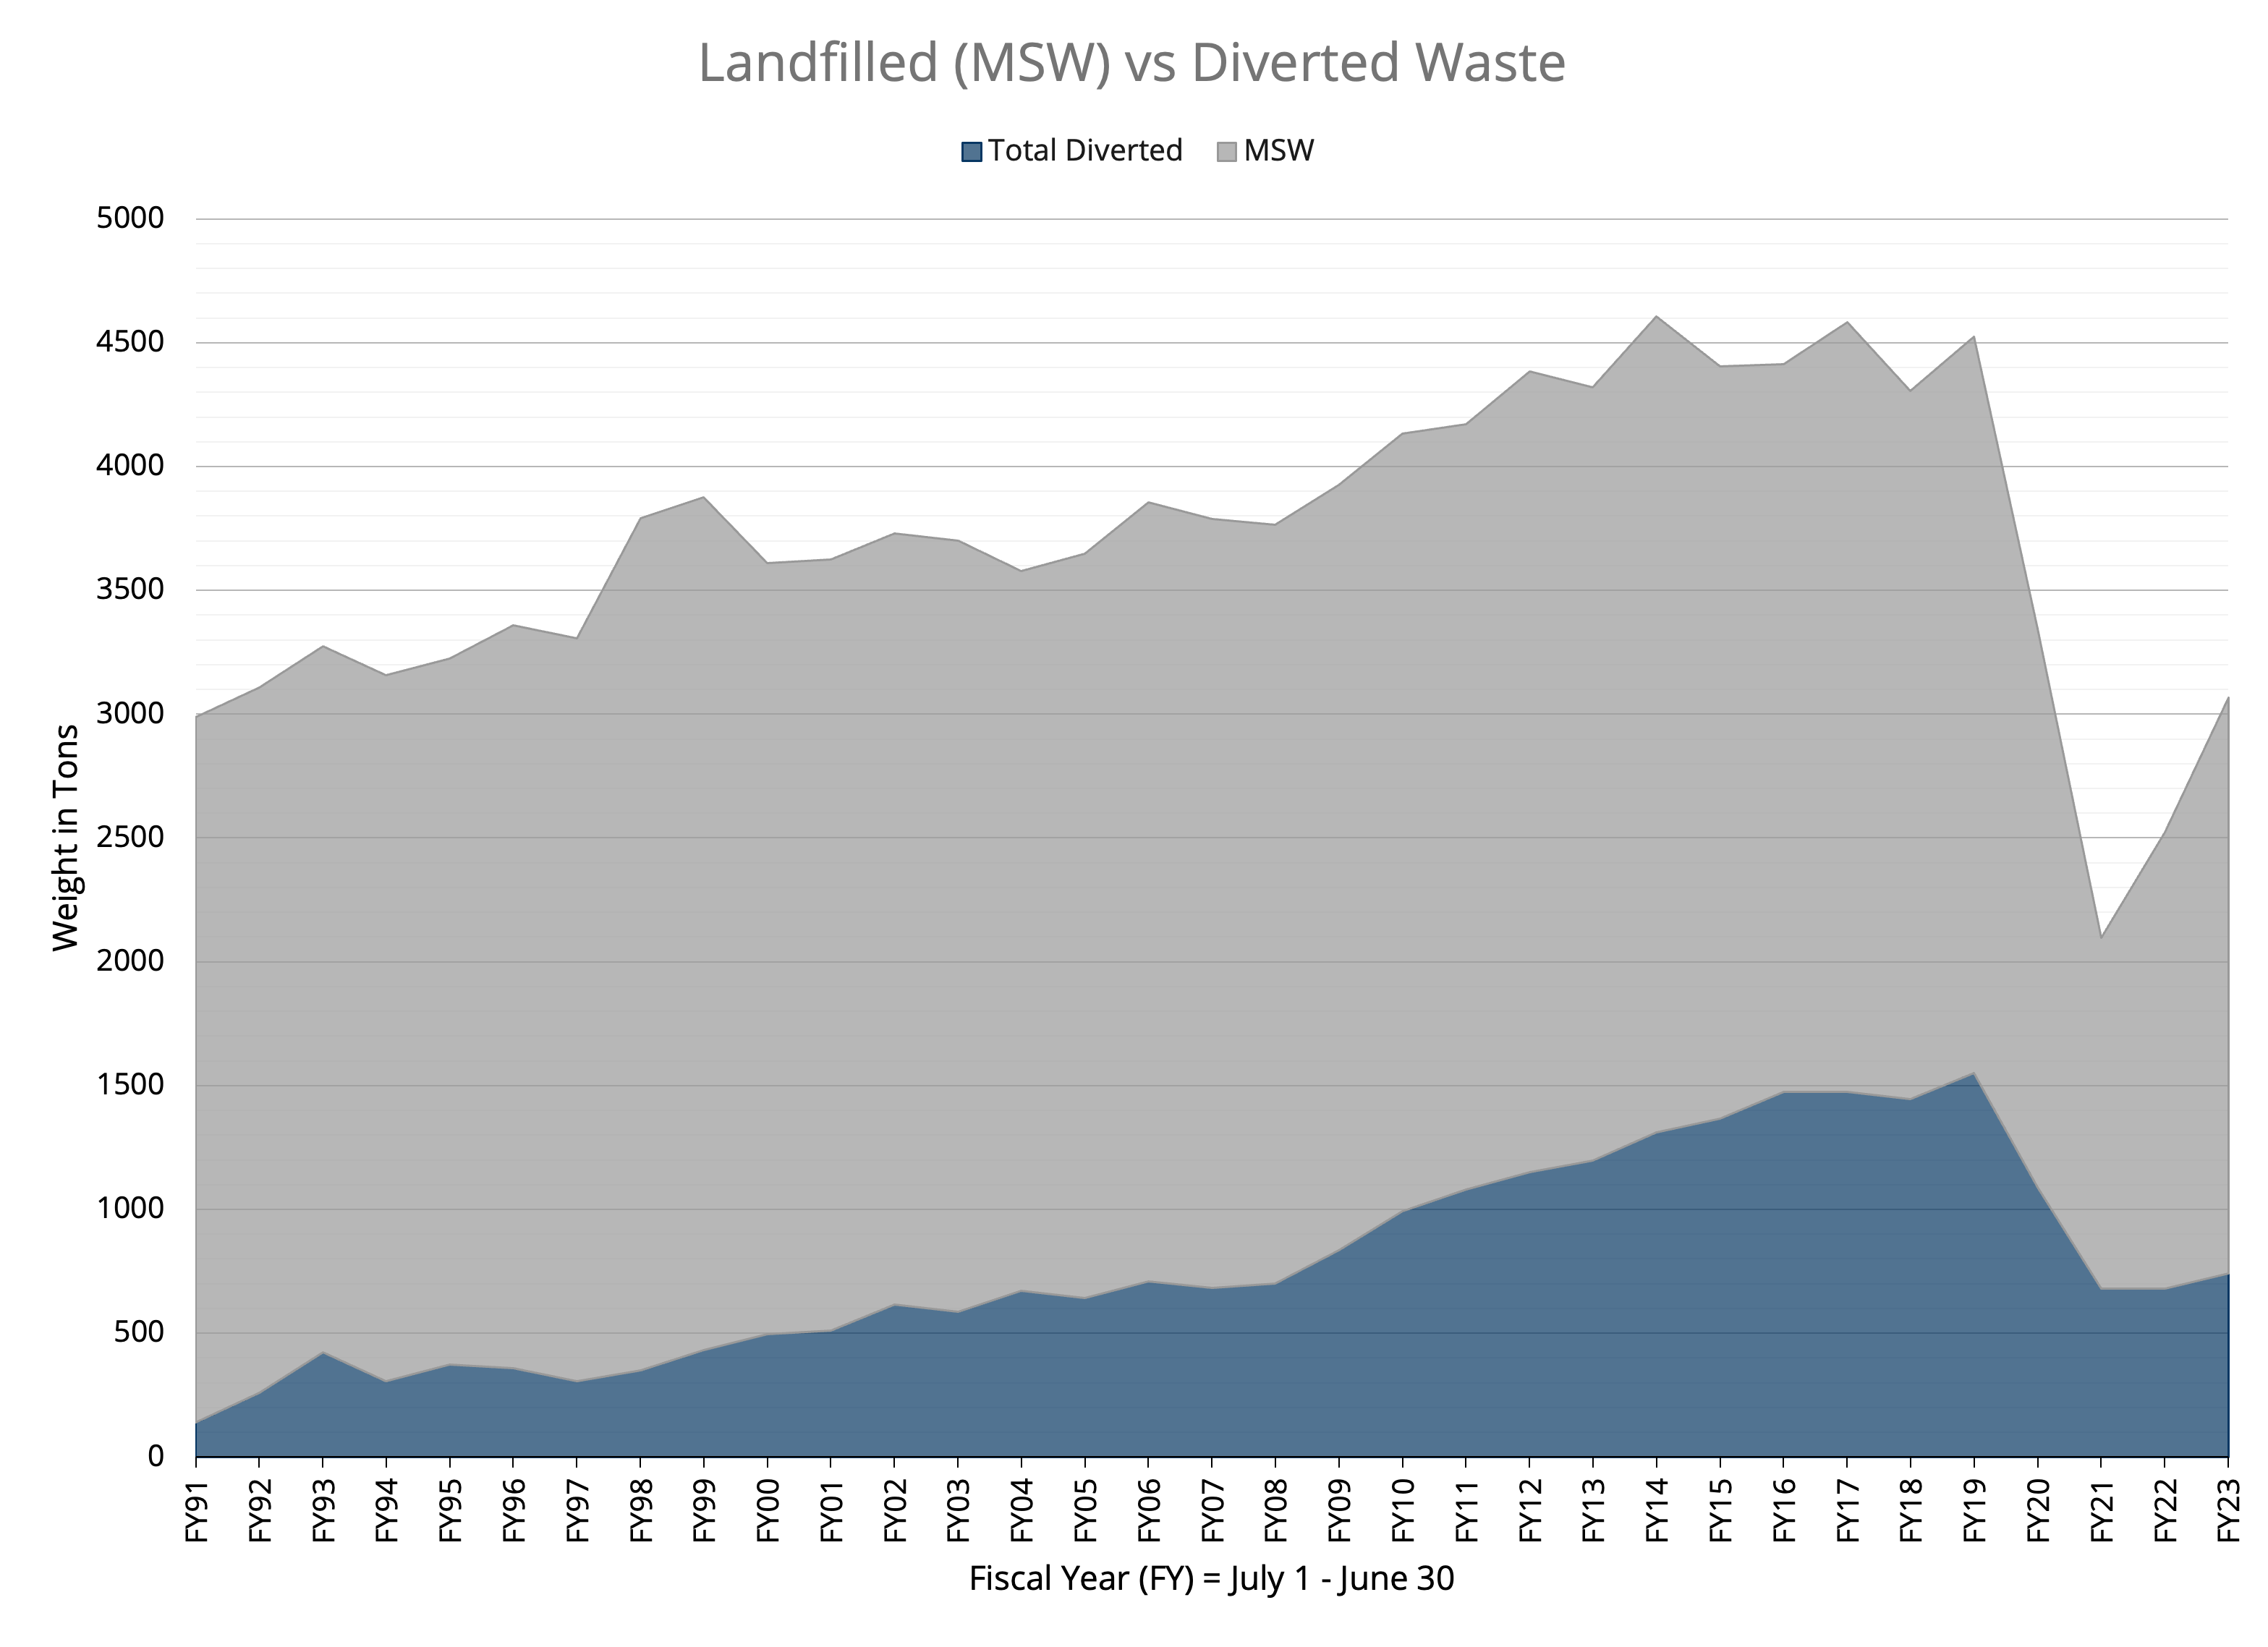 landfilled waste and MSW since FY91